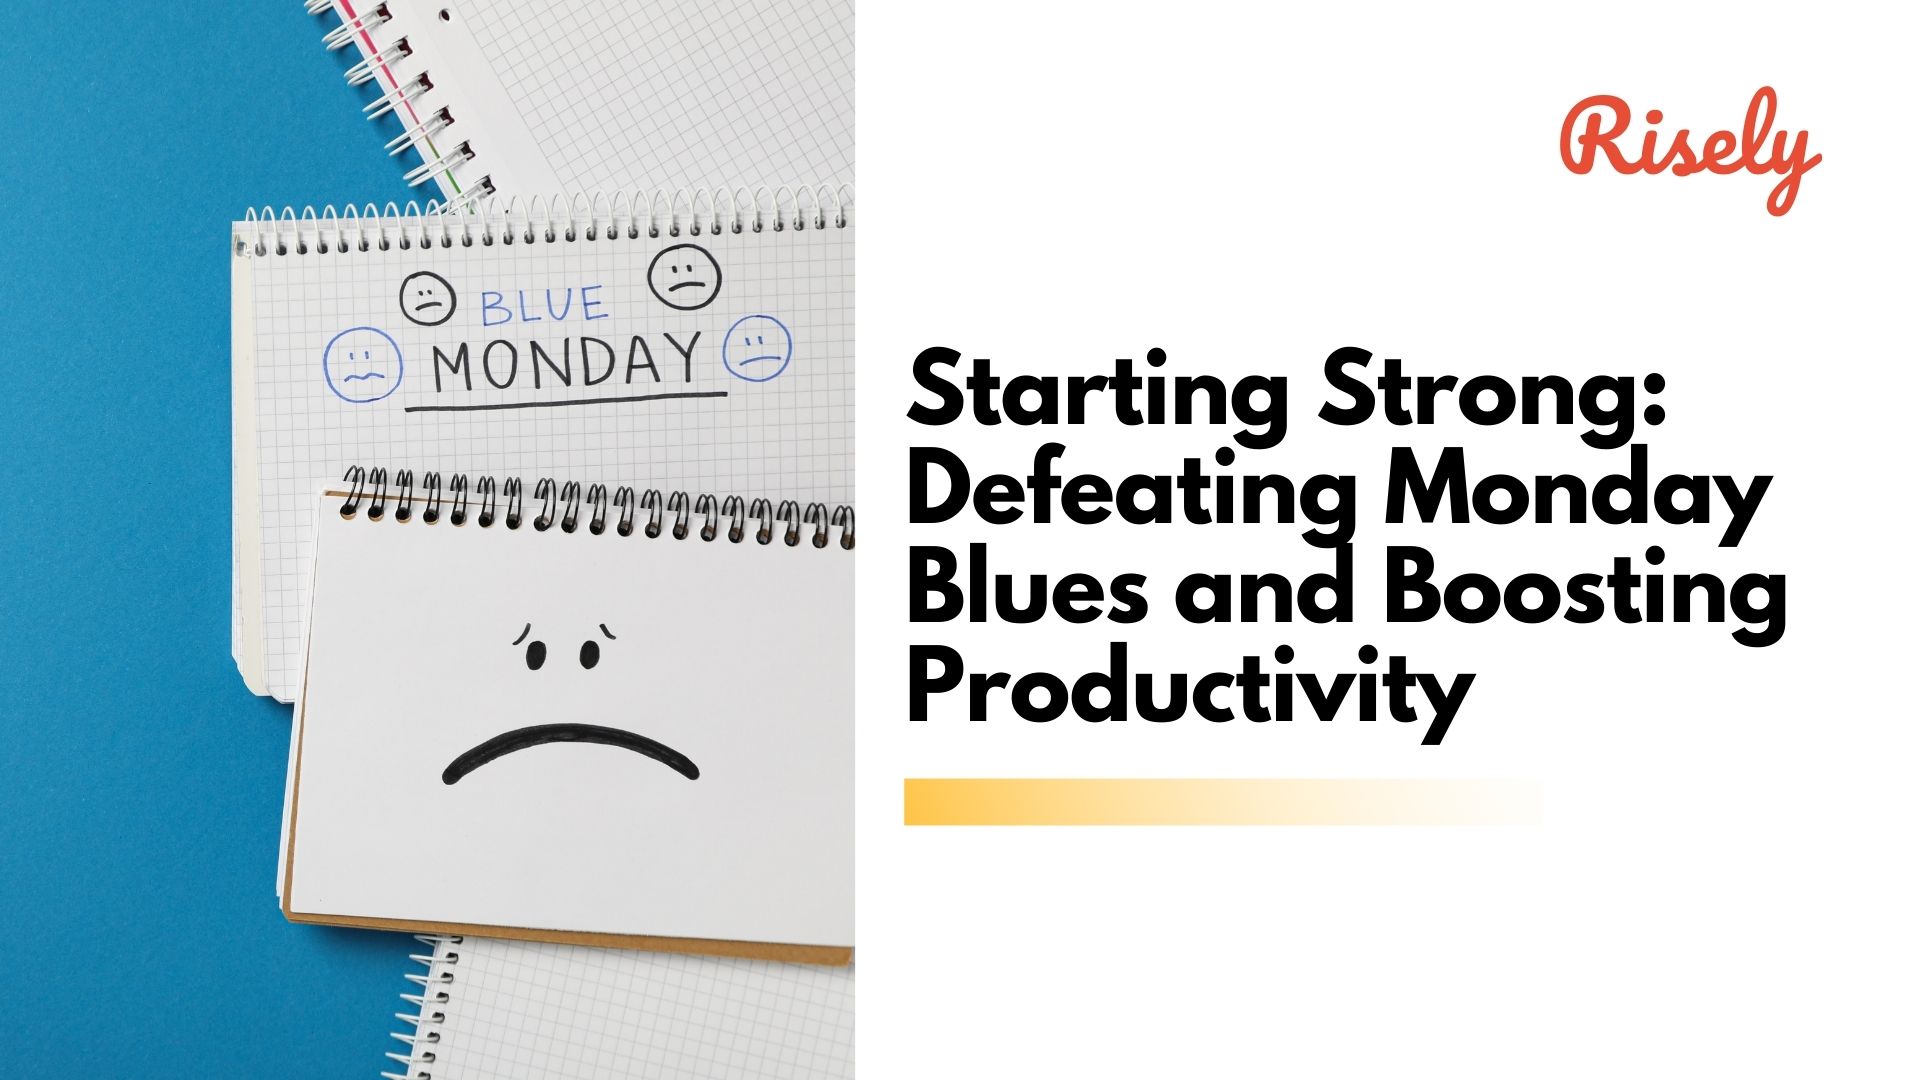 Starting Strong: Defeating Monday Blues and Boosting Productivity